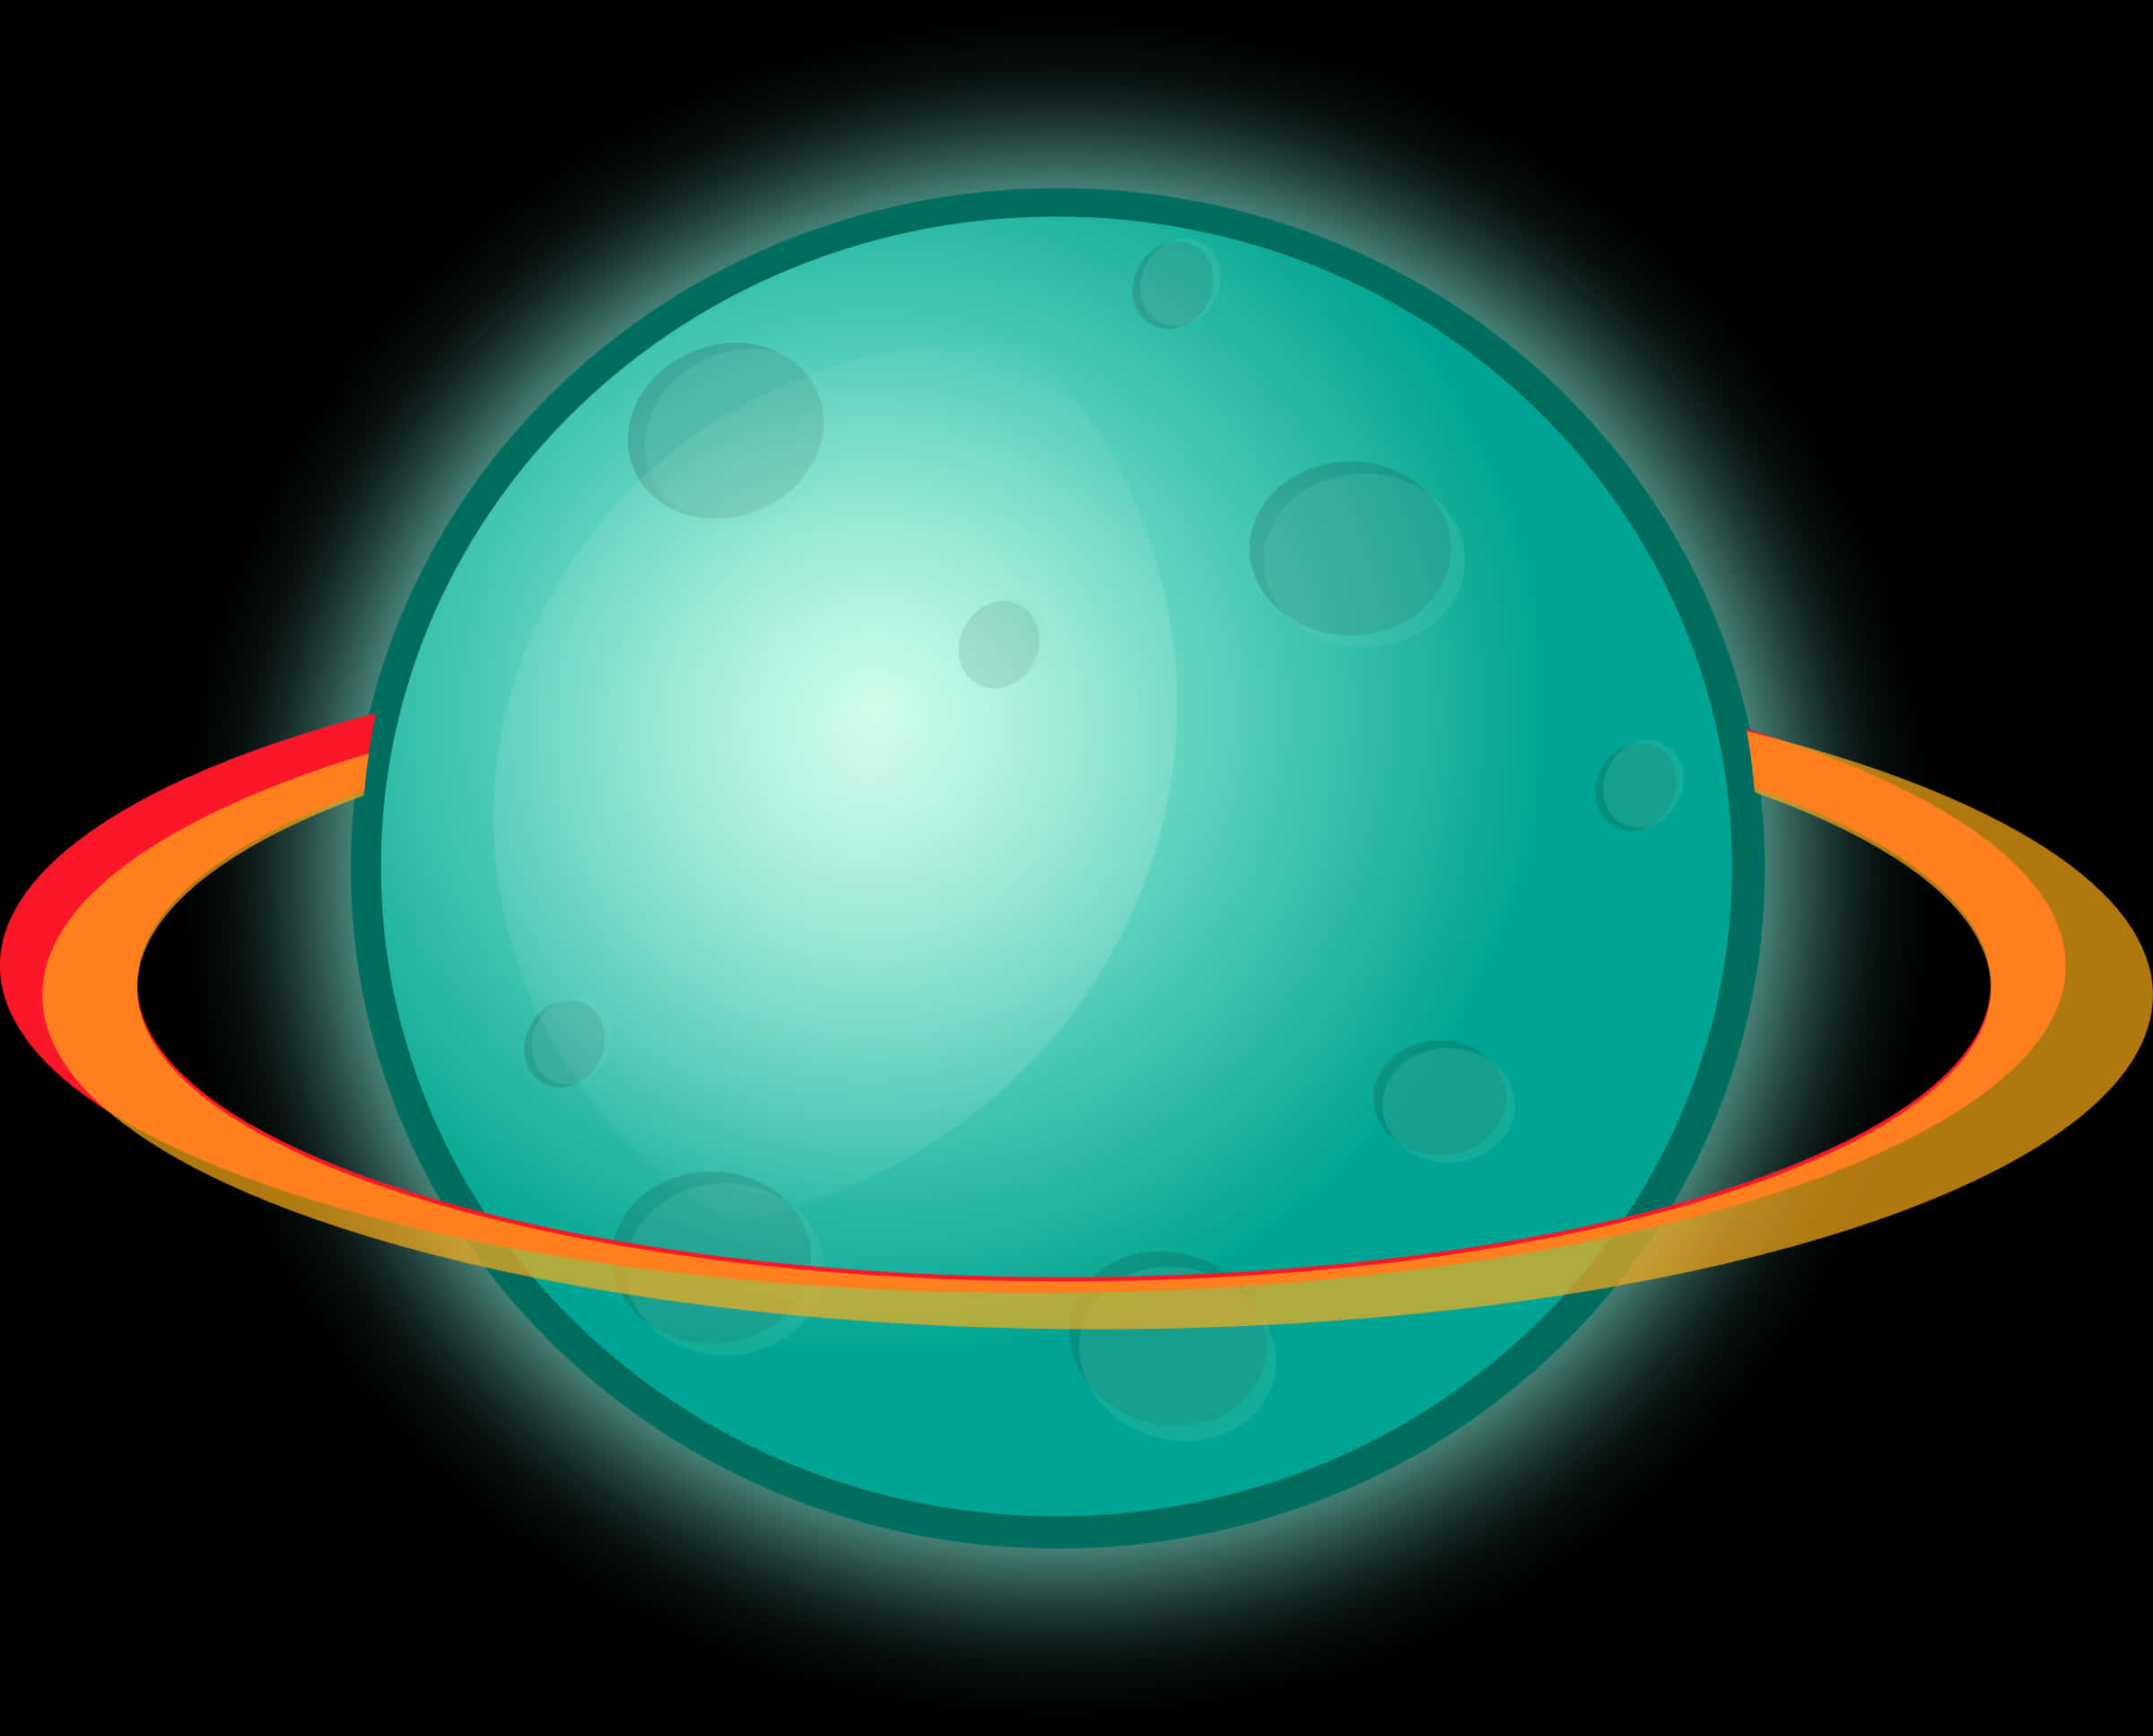 Aqua Planetwith Glowing Rings PNG image